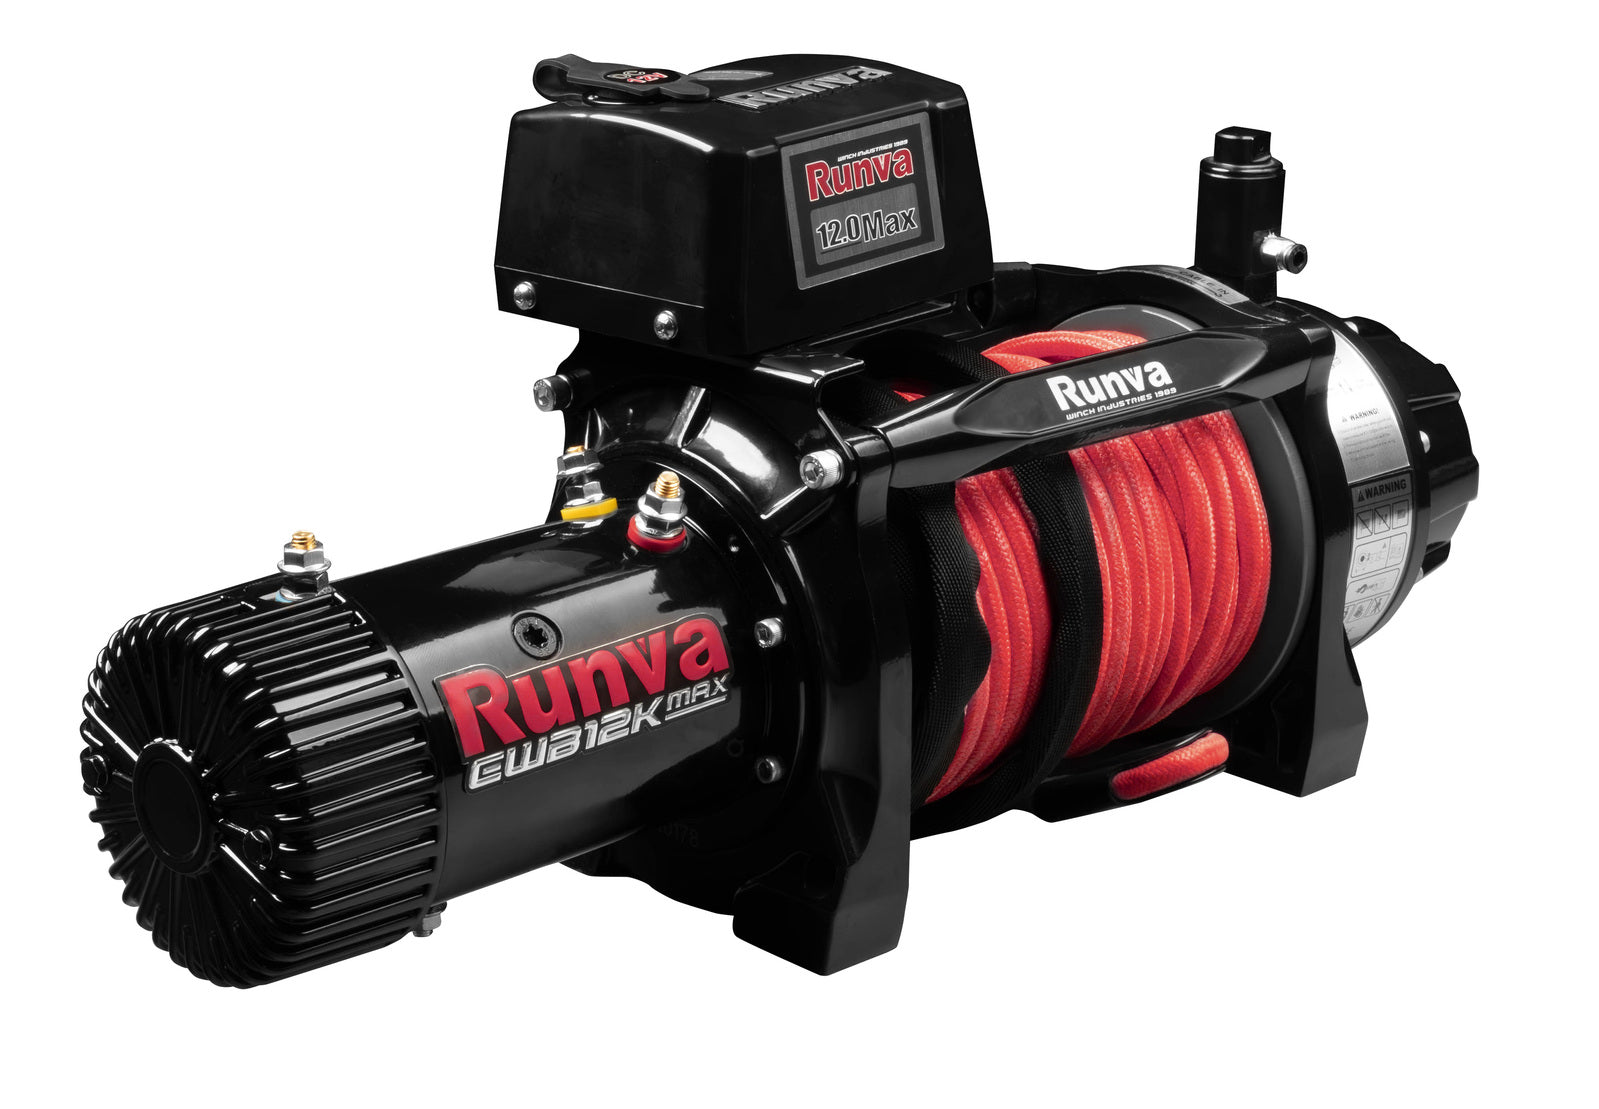 Runva EWB12k Max 12v with Armortech Synthetic Rope - Fast Shipping ...